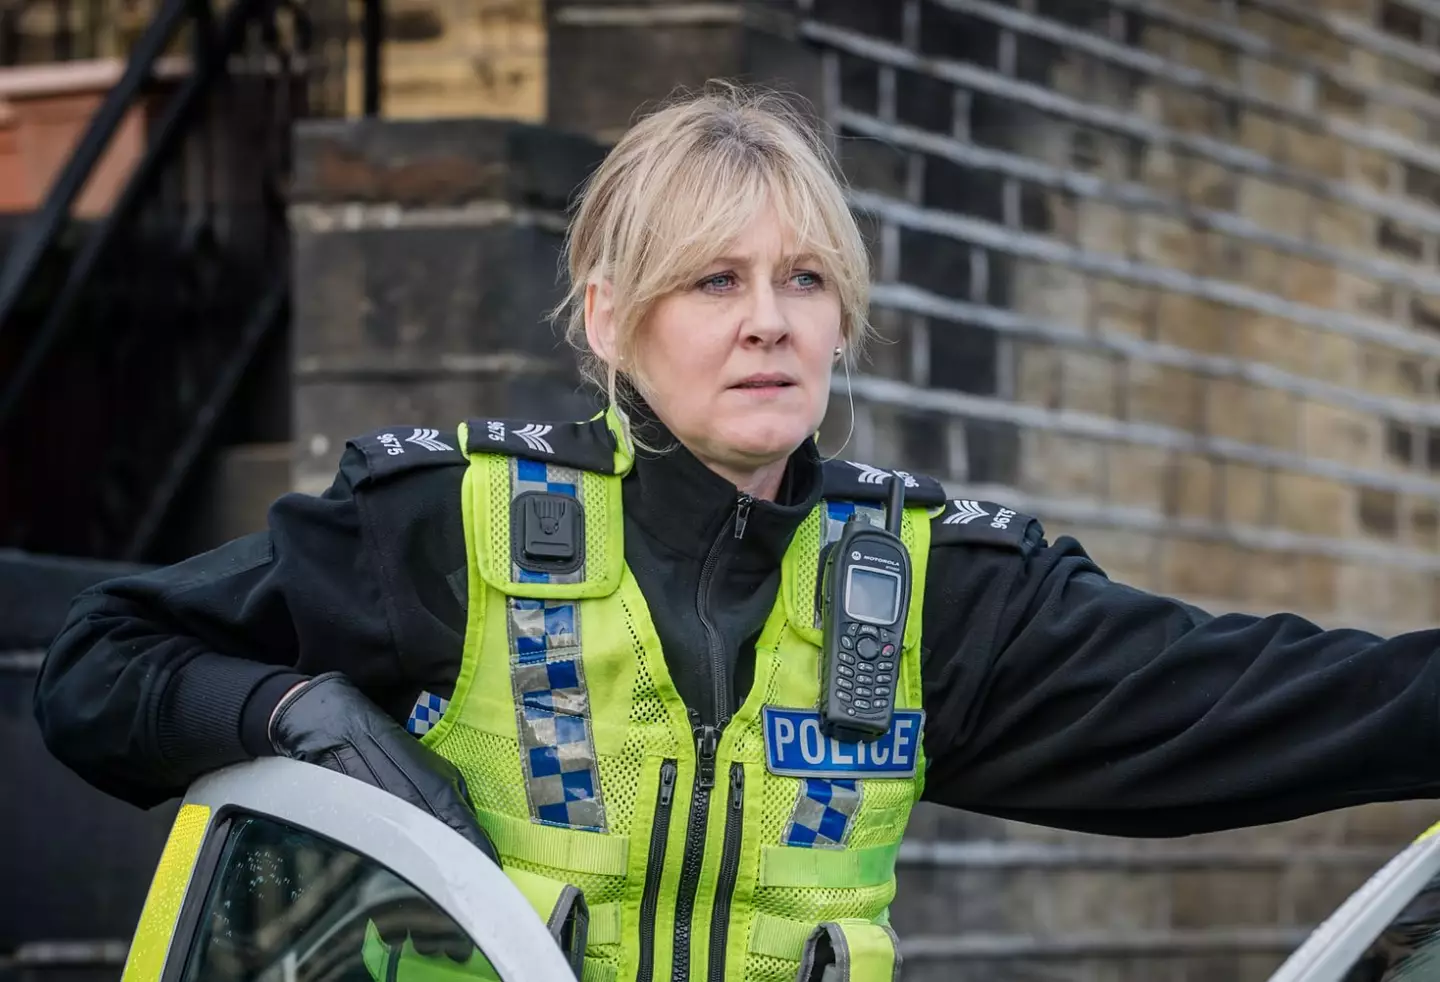 Lancashire's accent is so convincing in Happy Valley people can't believe she doesn't sound like that in real life.